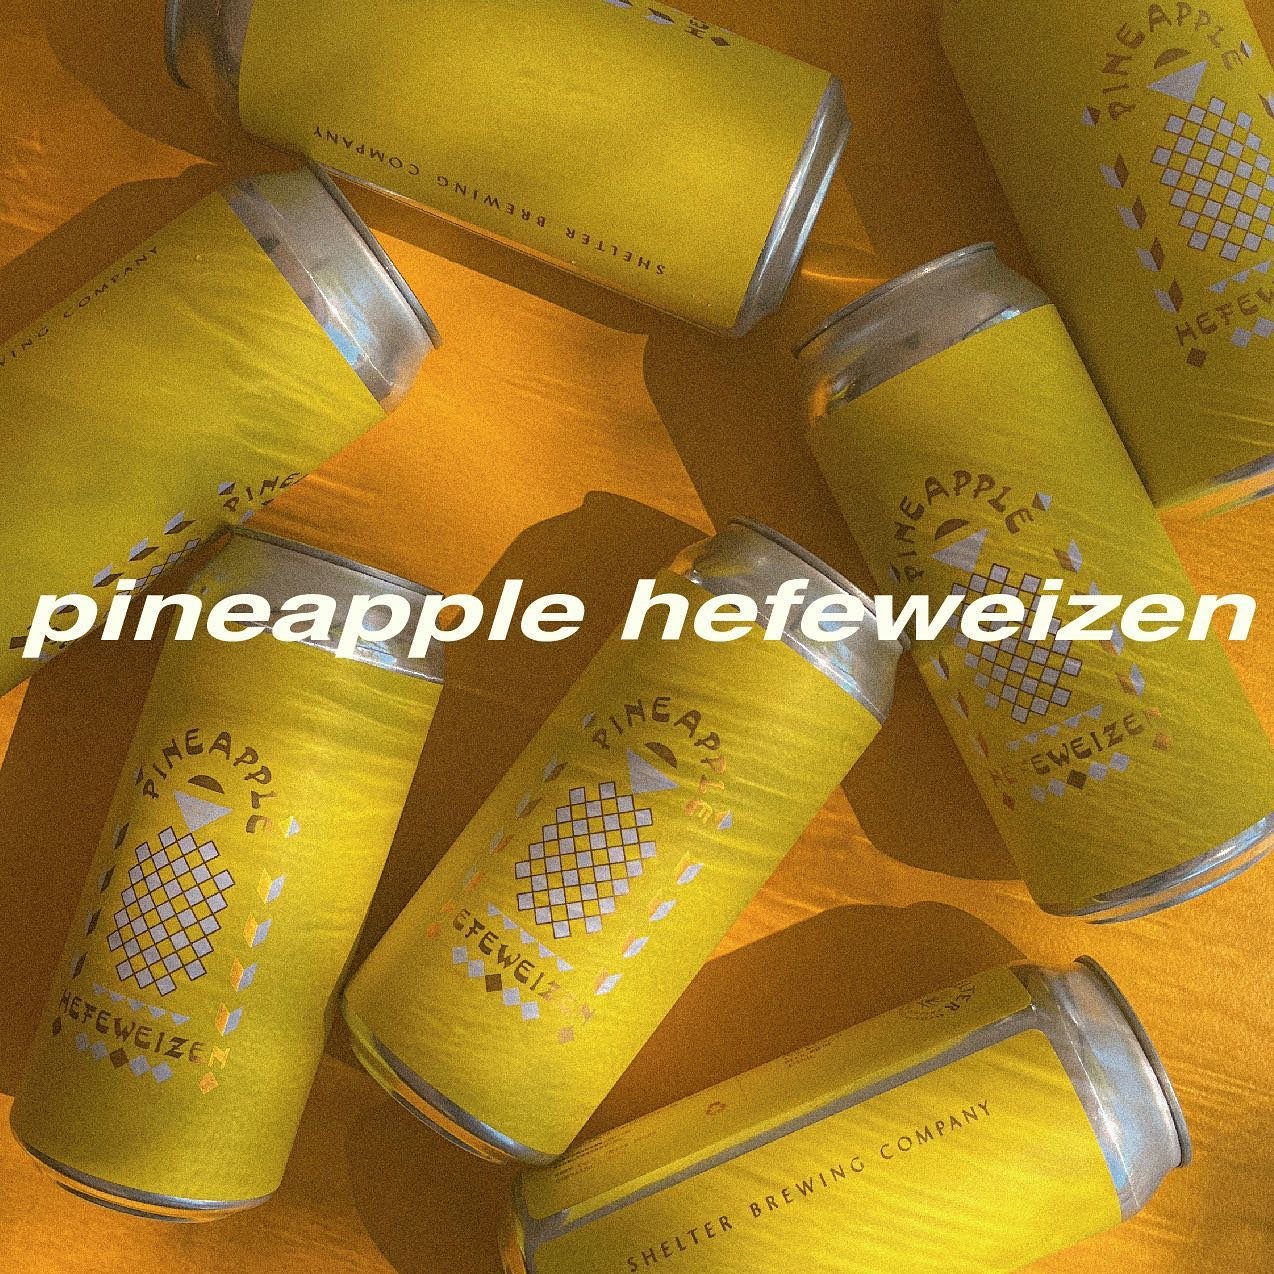 PINEAPPLE HEFEWEIZEN IS BACK 

a German wheat beer packed with pineapple, and flavourful notes of banana and close. hazy as hell with a low bitterness &mdash; 

it might not be spring weather today but this beer makes it feel like patio szn 🌞 

avai